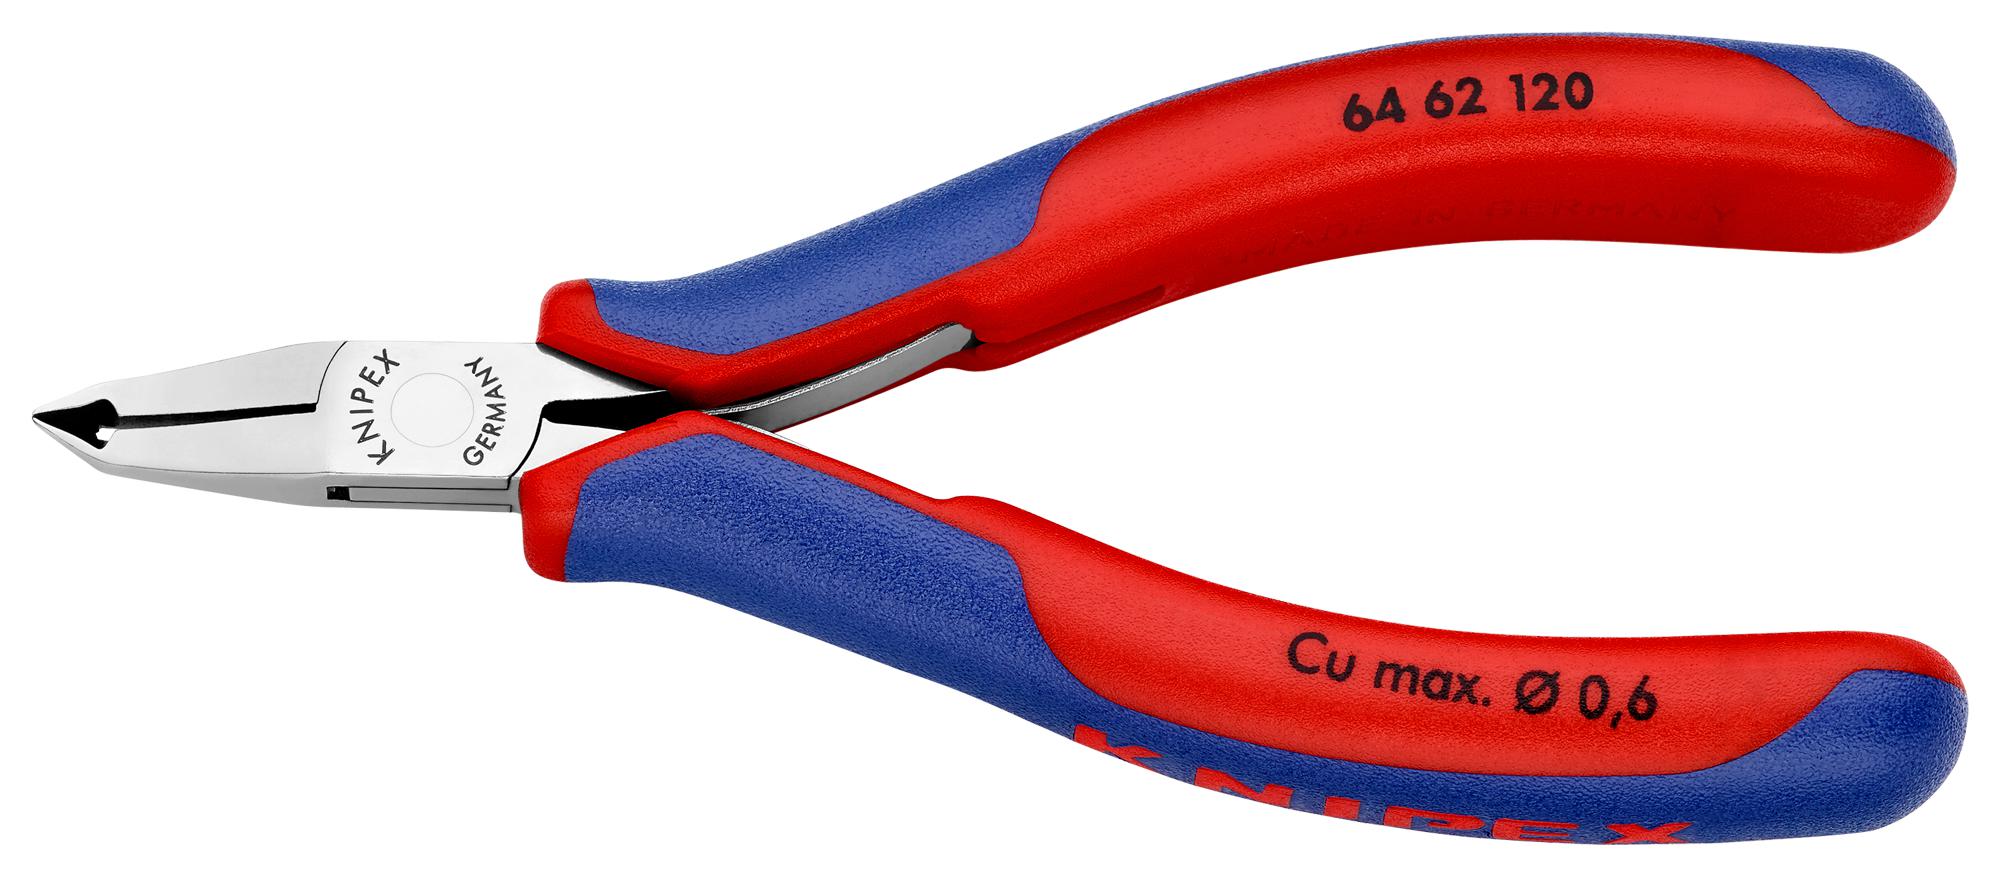 Knipex 64 62 120 Oblique Cutting NIppers